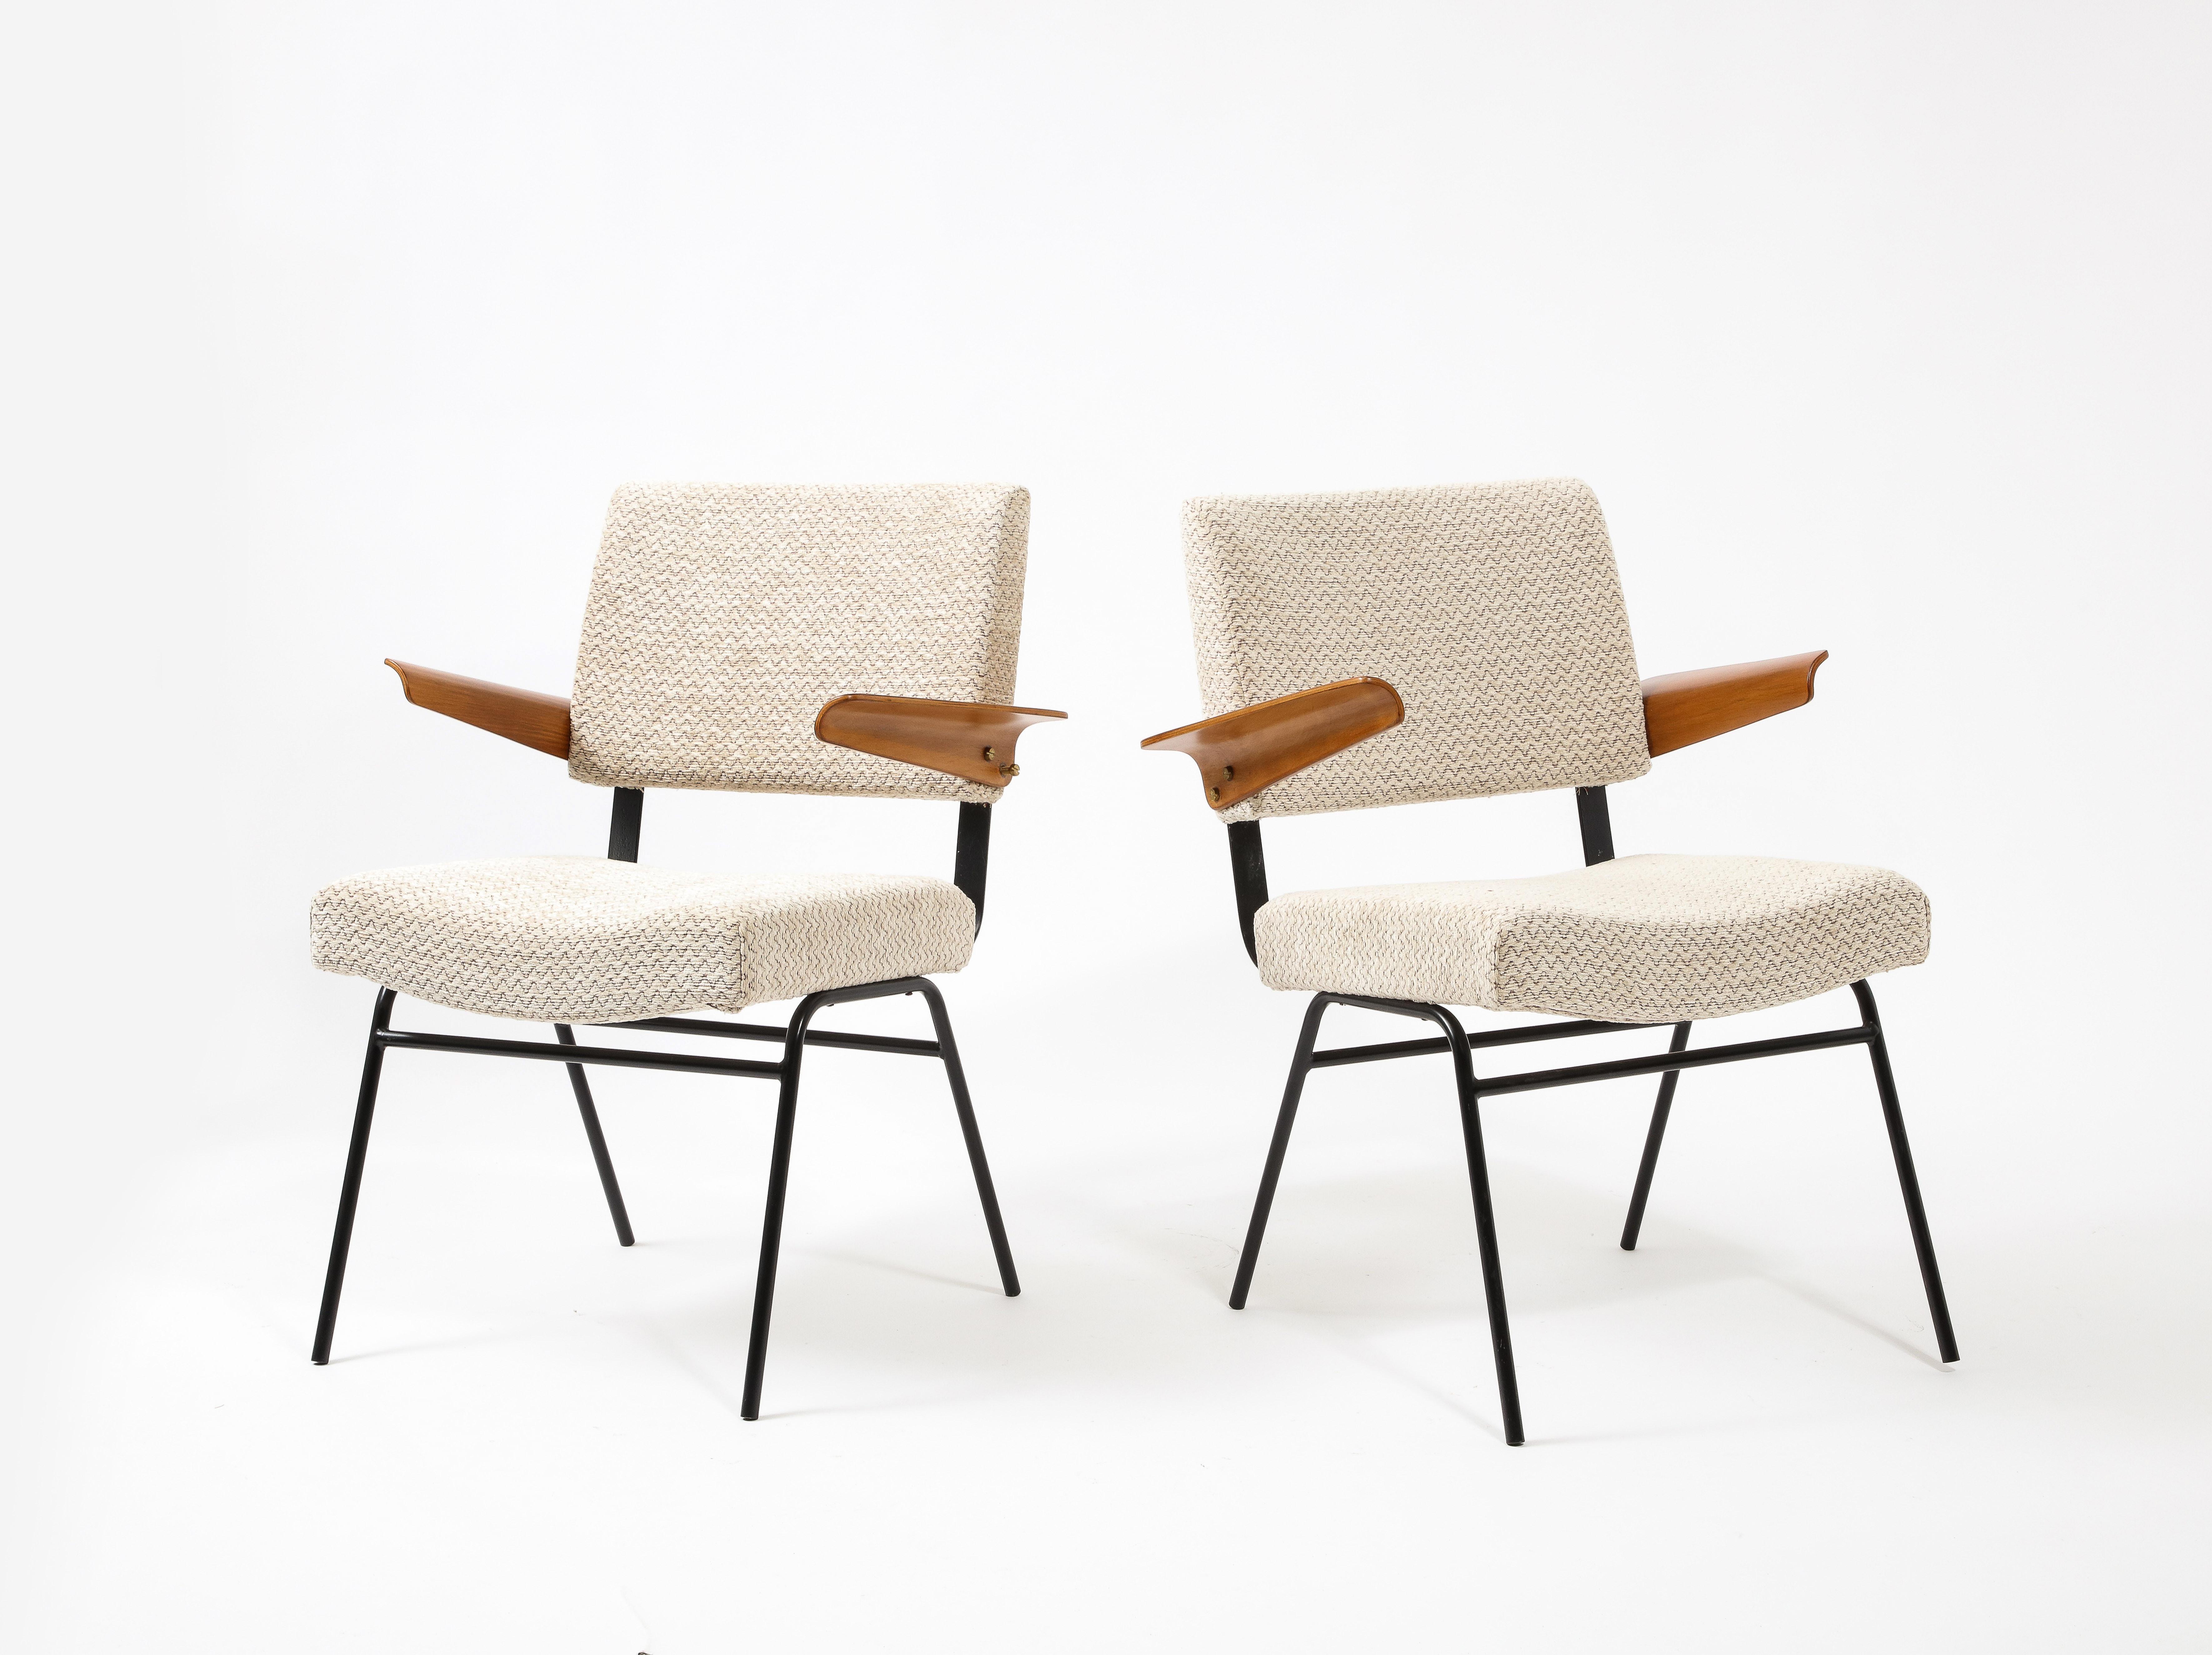 Elegant pair of armchairs with bent ply arms and a flat metal connection between the seat and back that acts like a spring.
